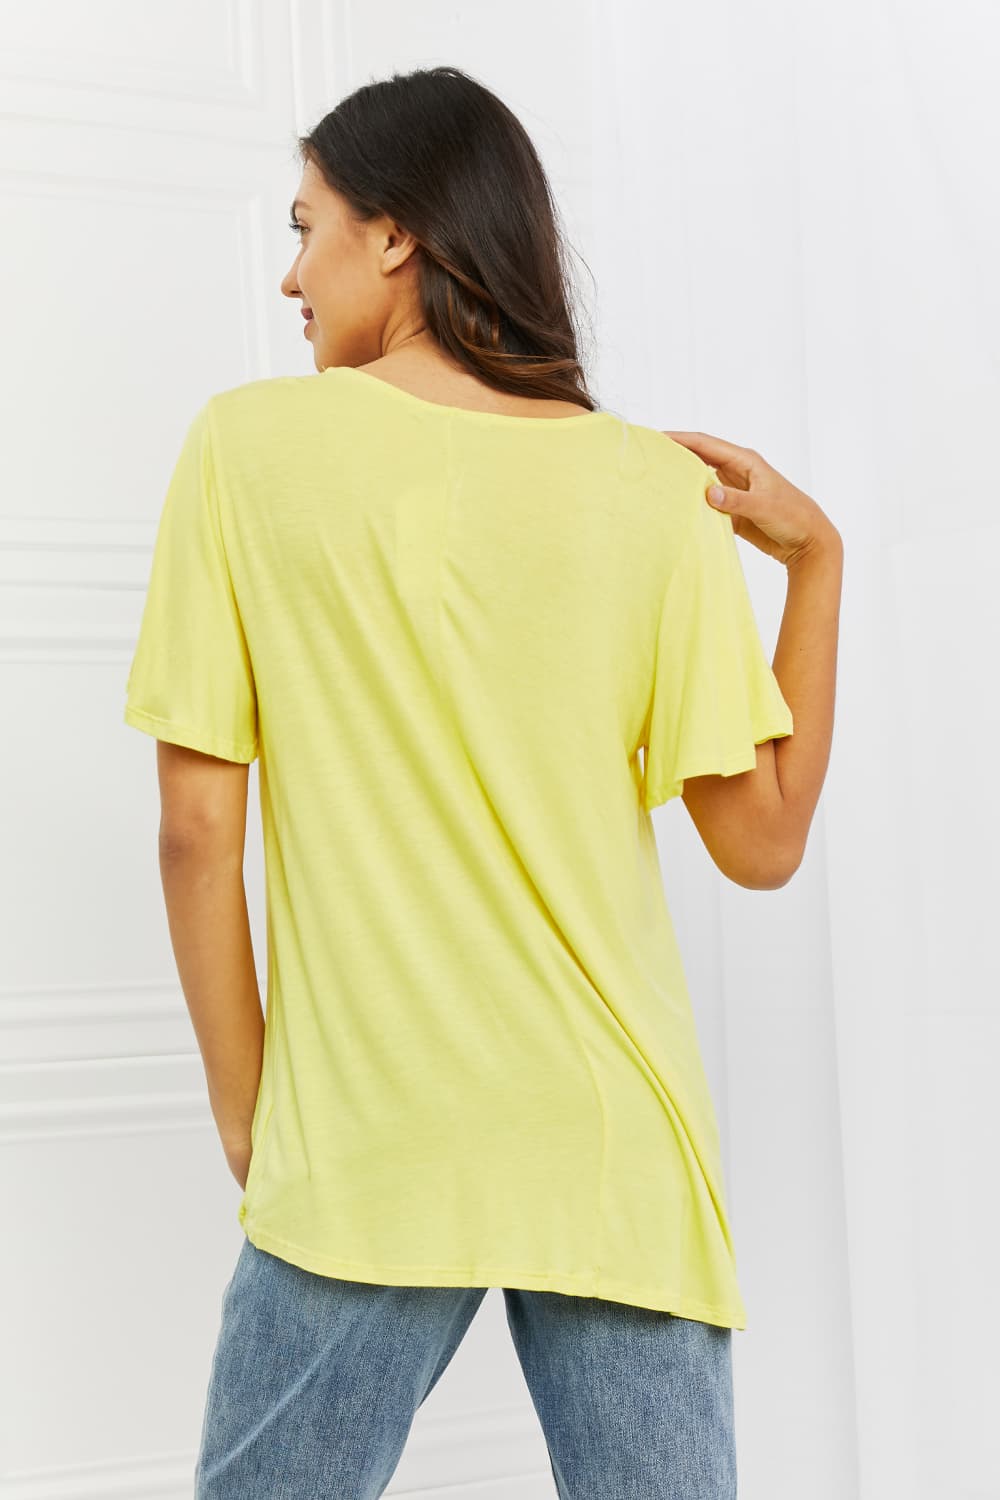 Luella Top in Yellow